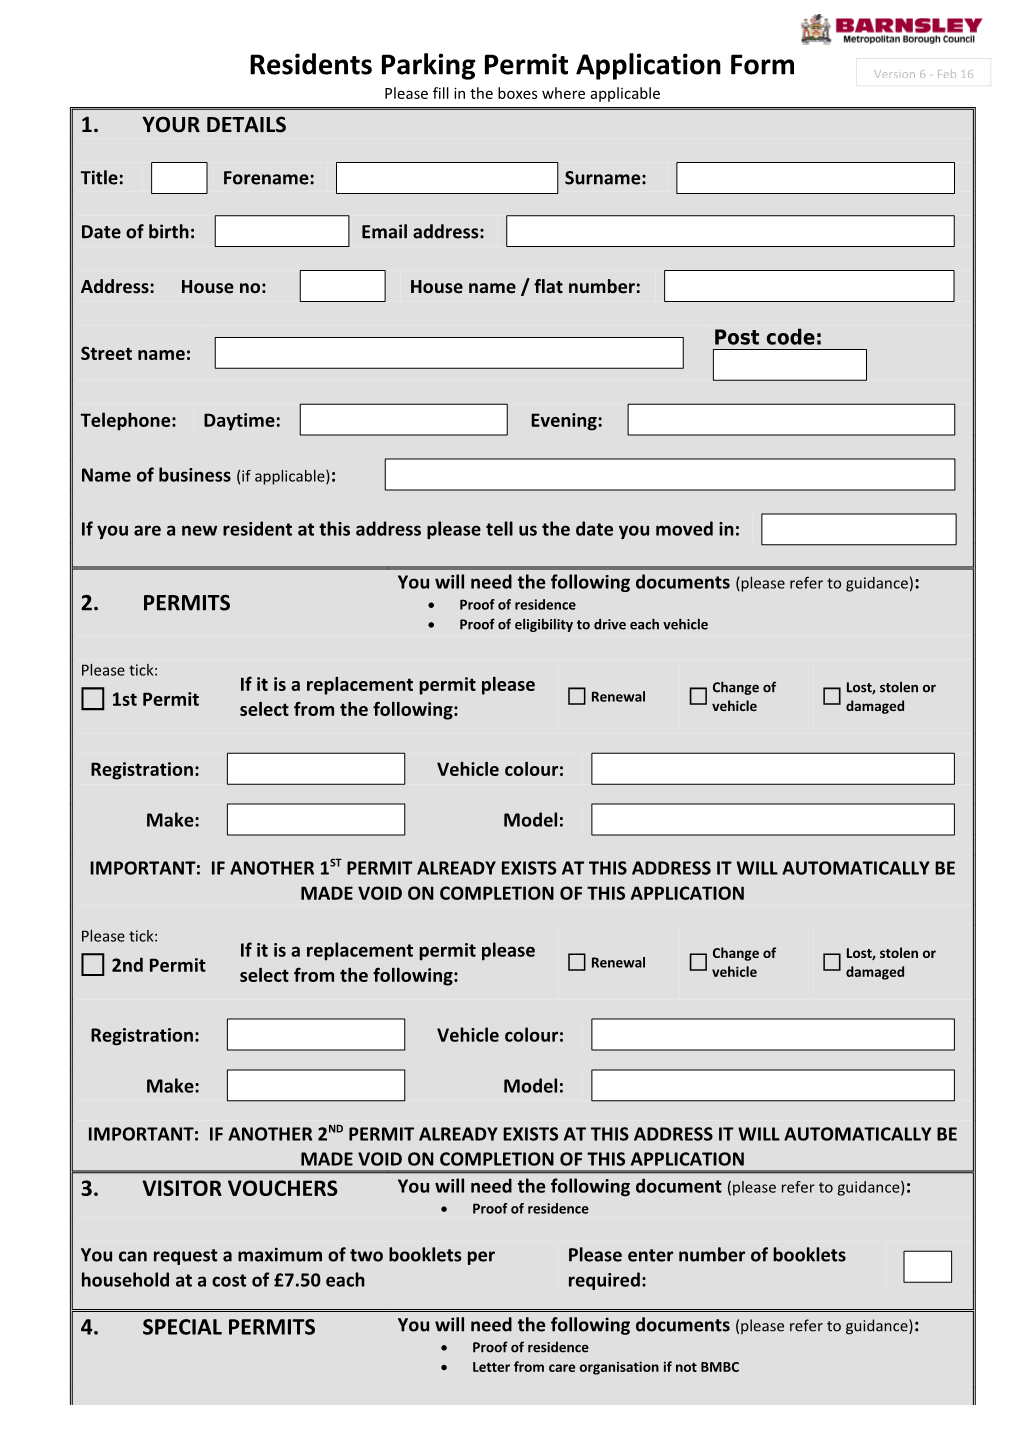 Please Fill in the Boxes Where Applicable